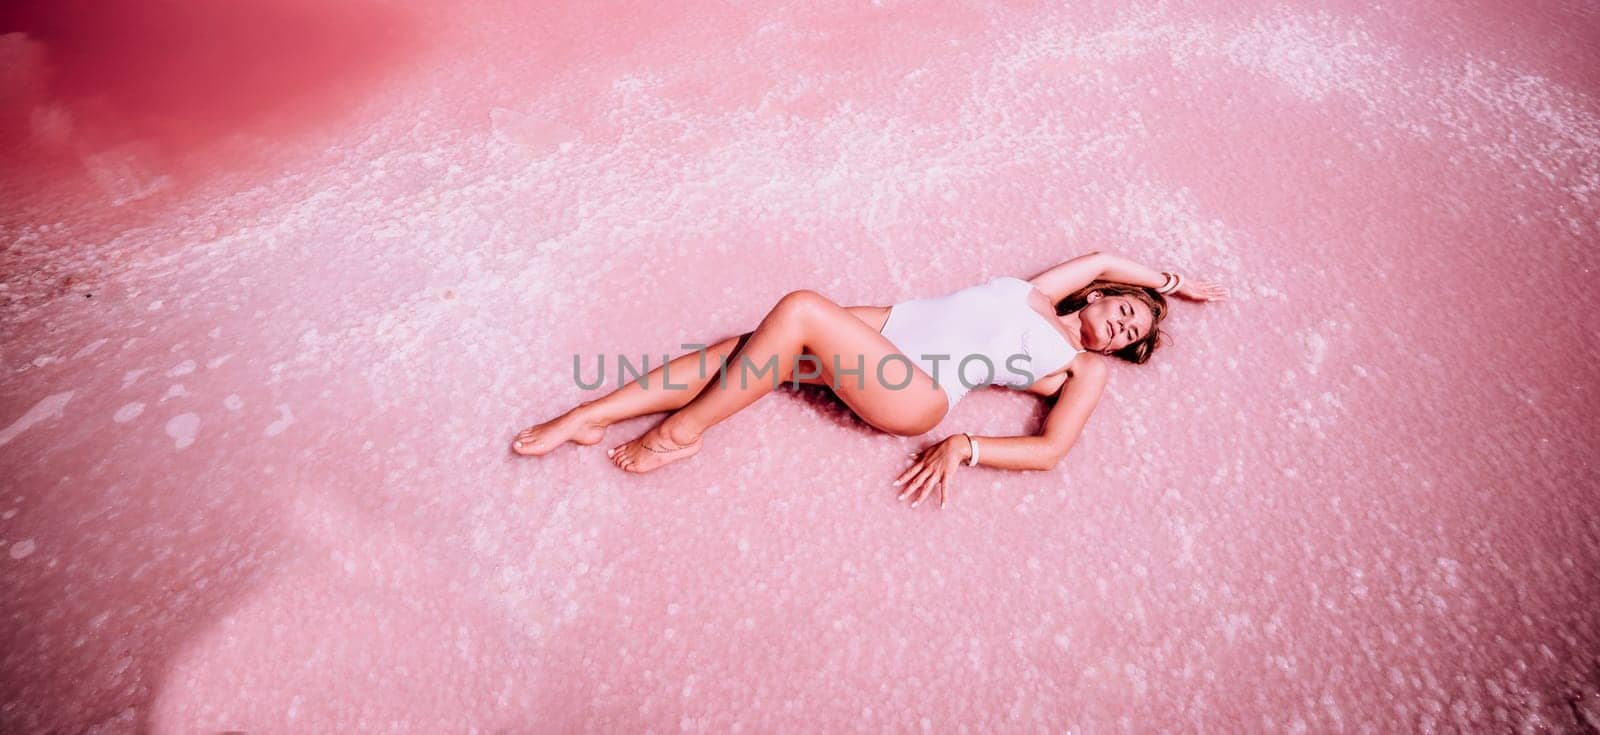 Woman in a pink salt lake banner . She lies in a white bathing suit. Wanderlust photo for memory.